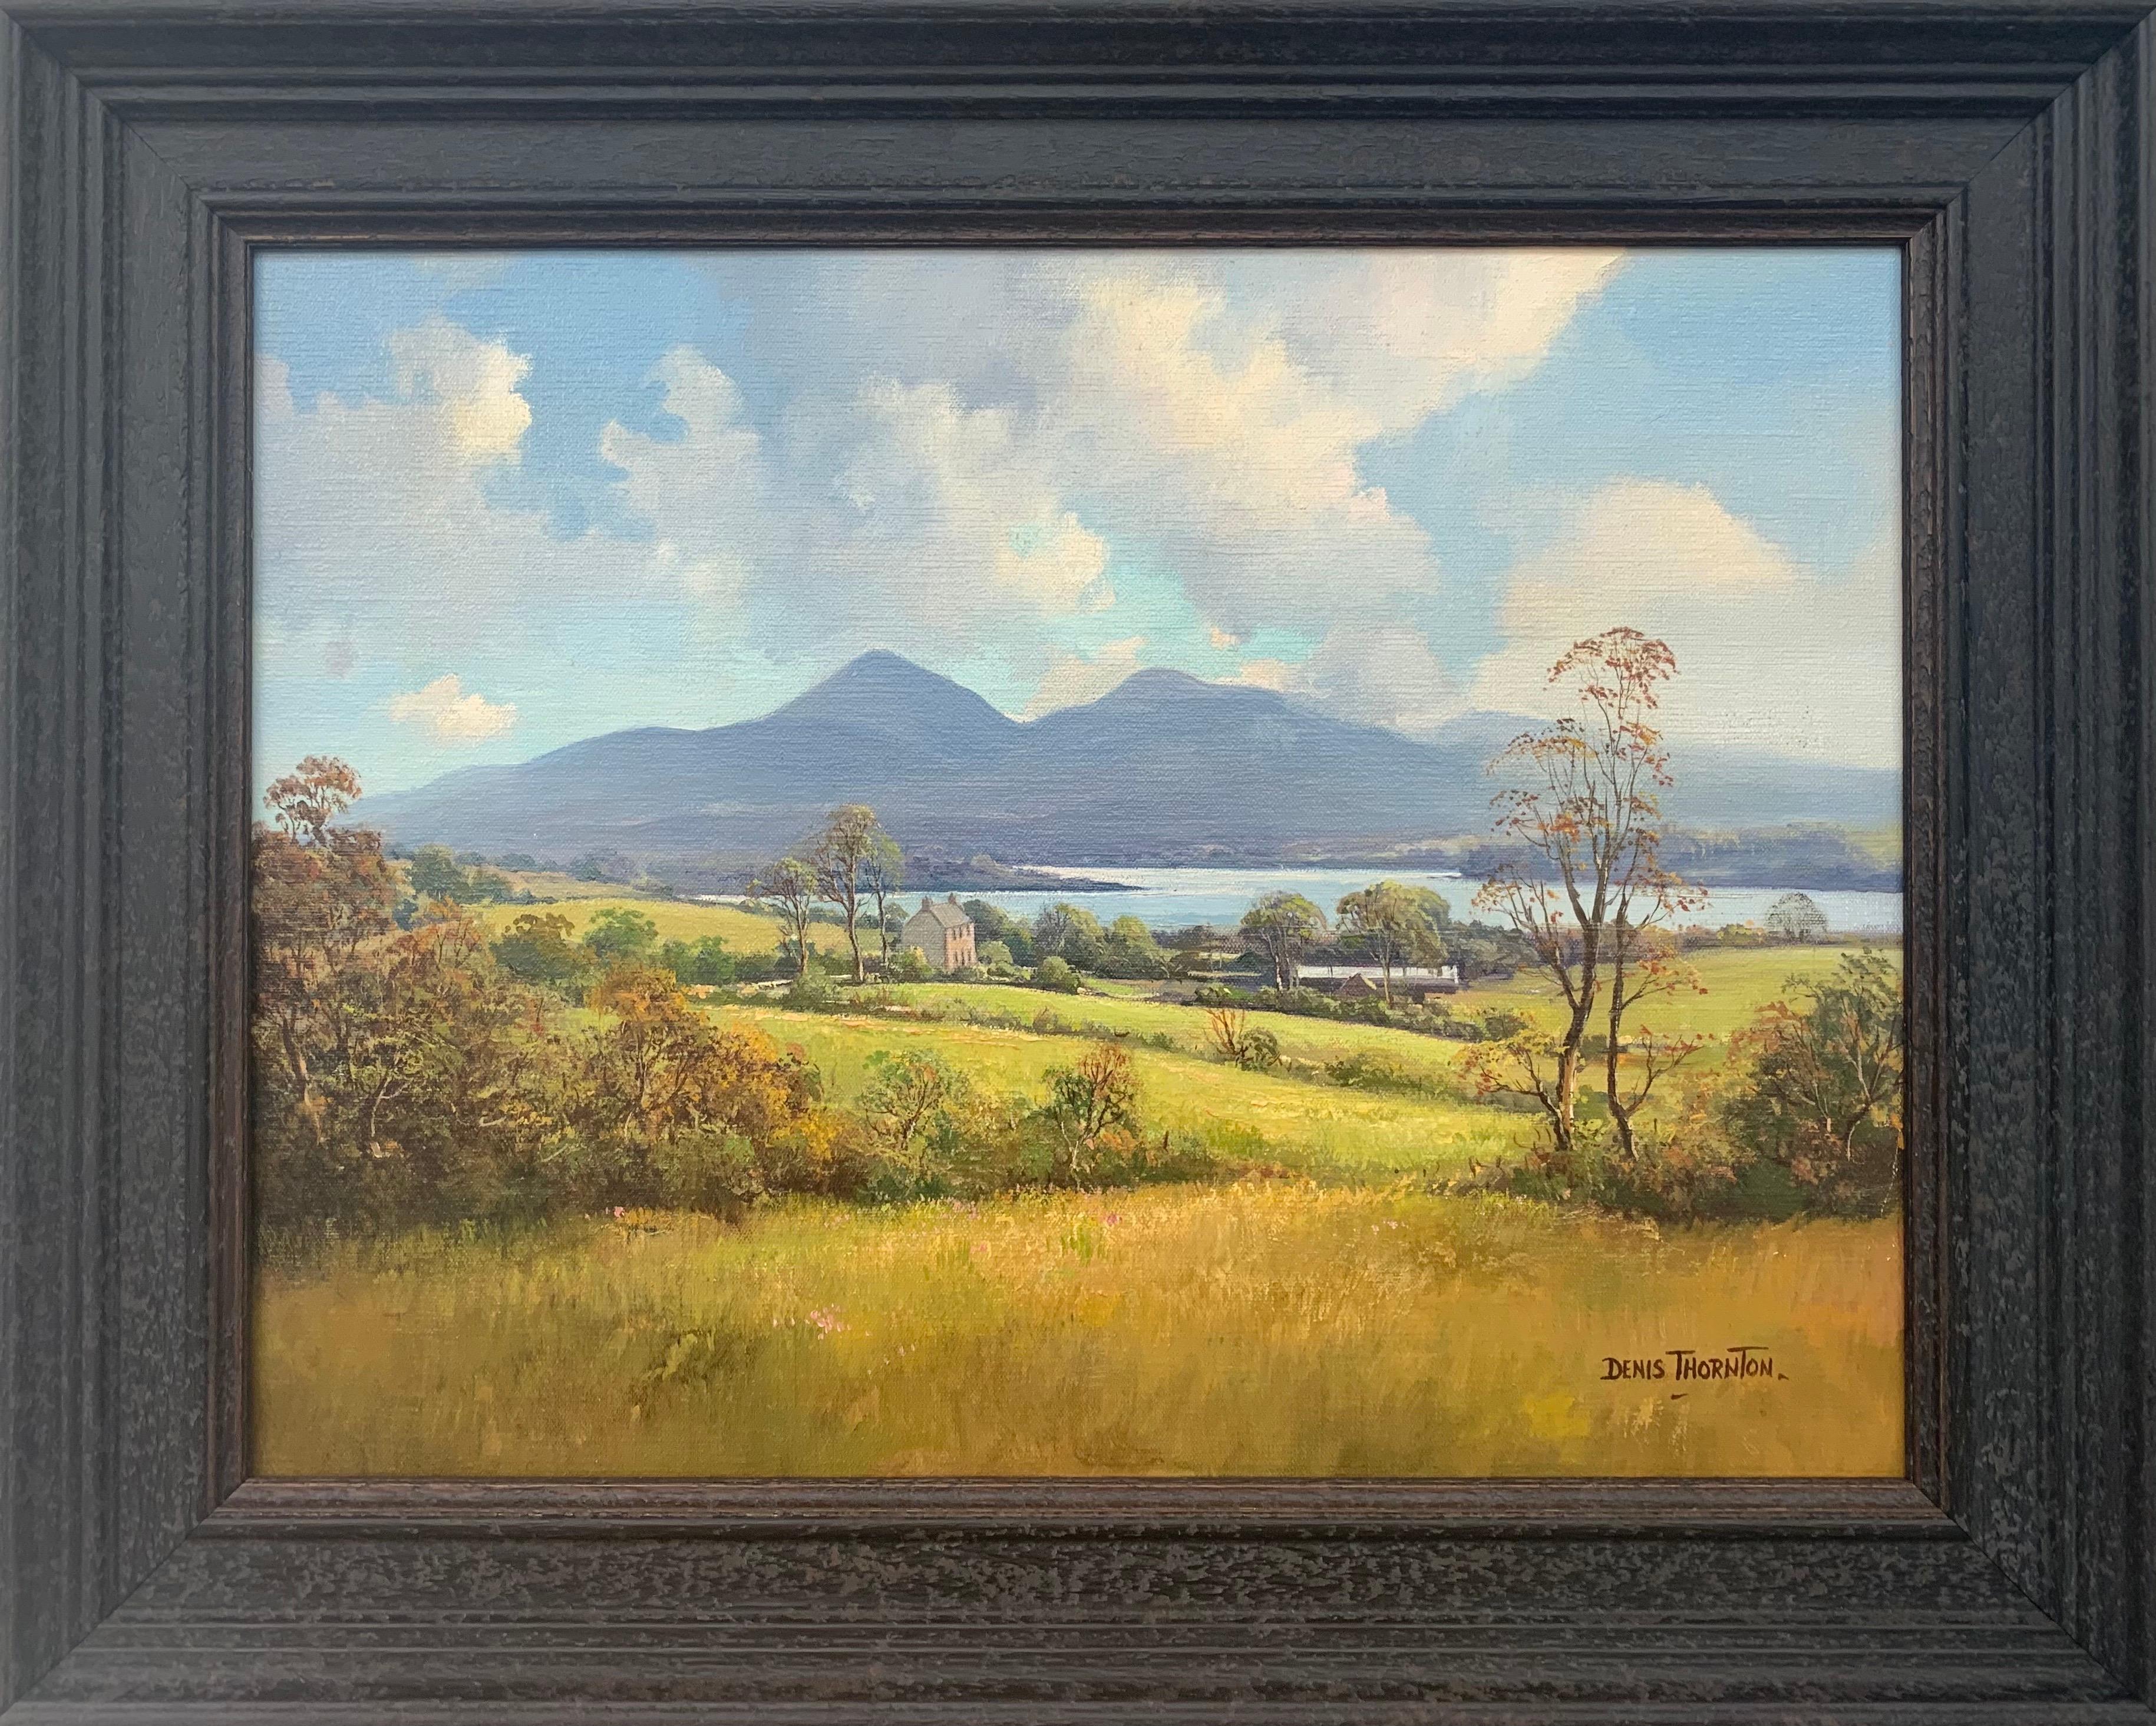 Denis Thornton Landscape Art - Oil Painting of The Mournes Mountains in Northern Ireland by Modern Irish Artist